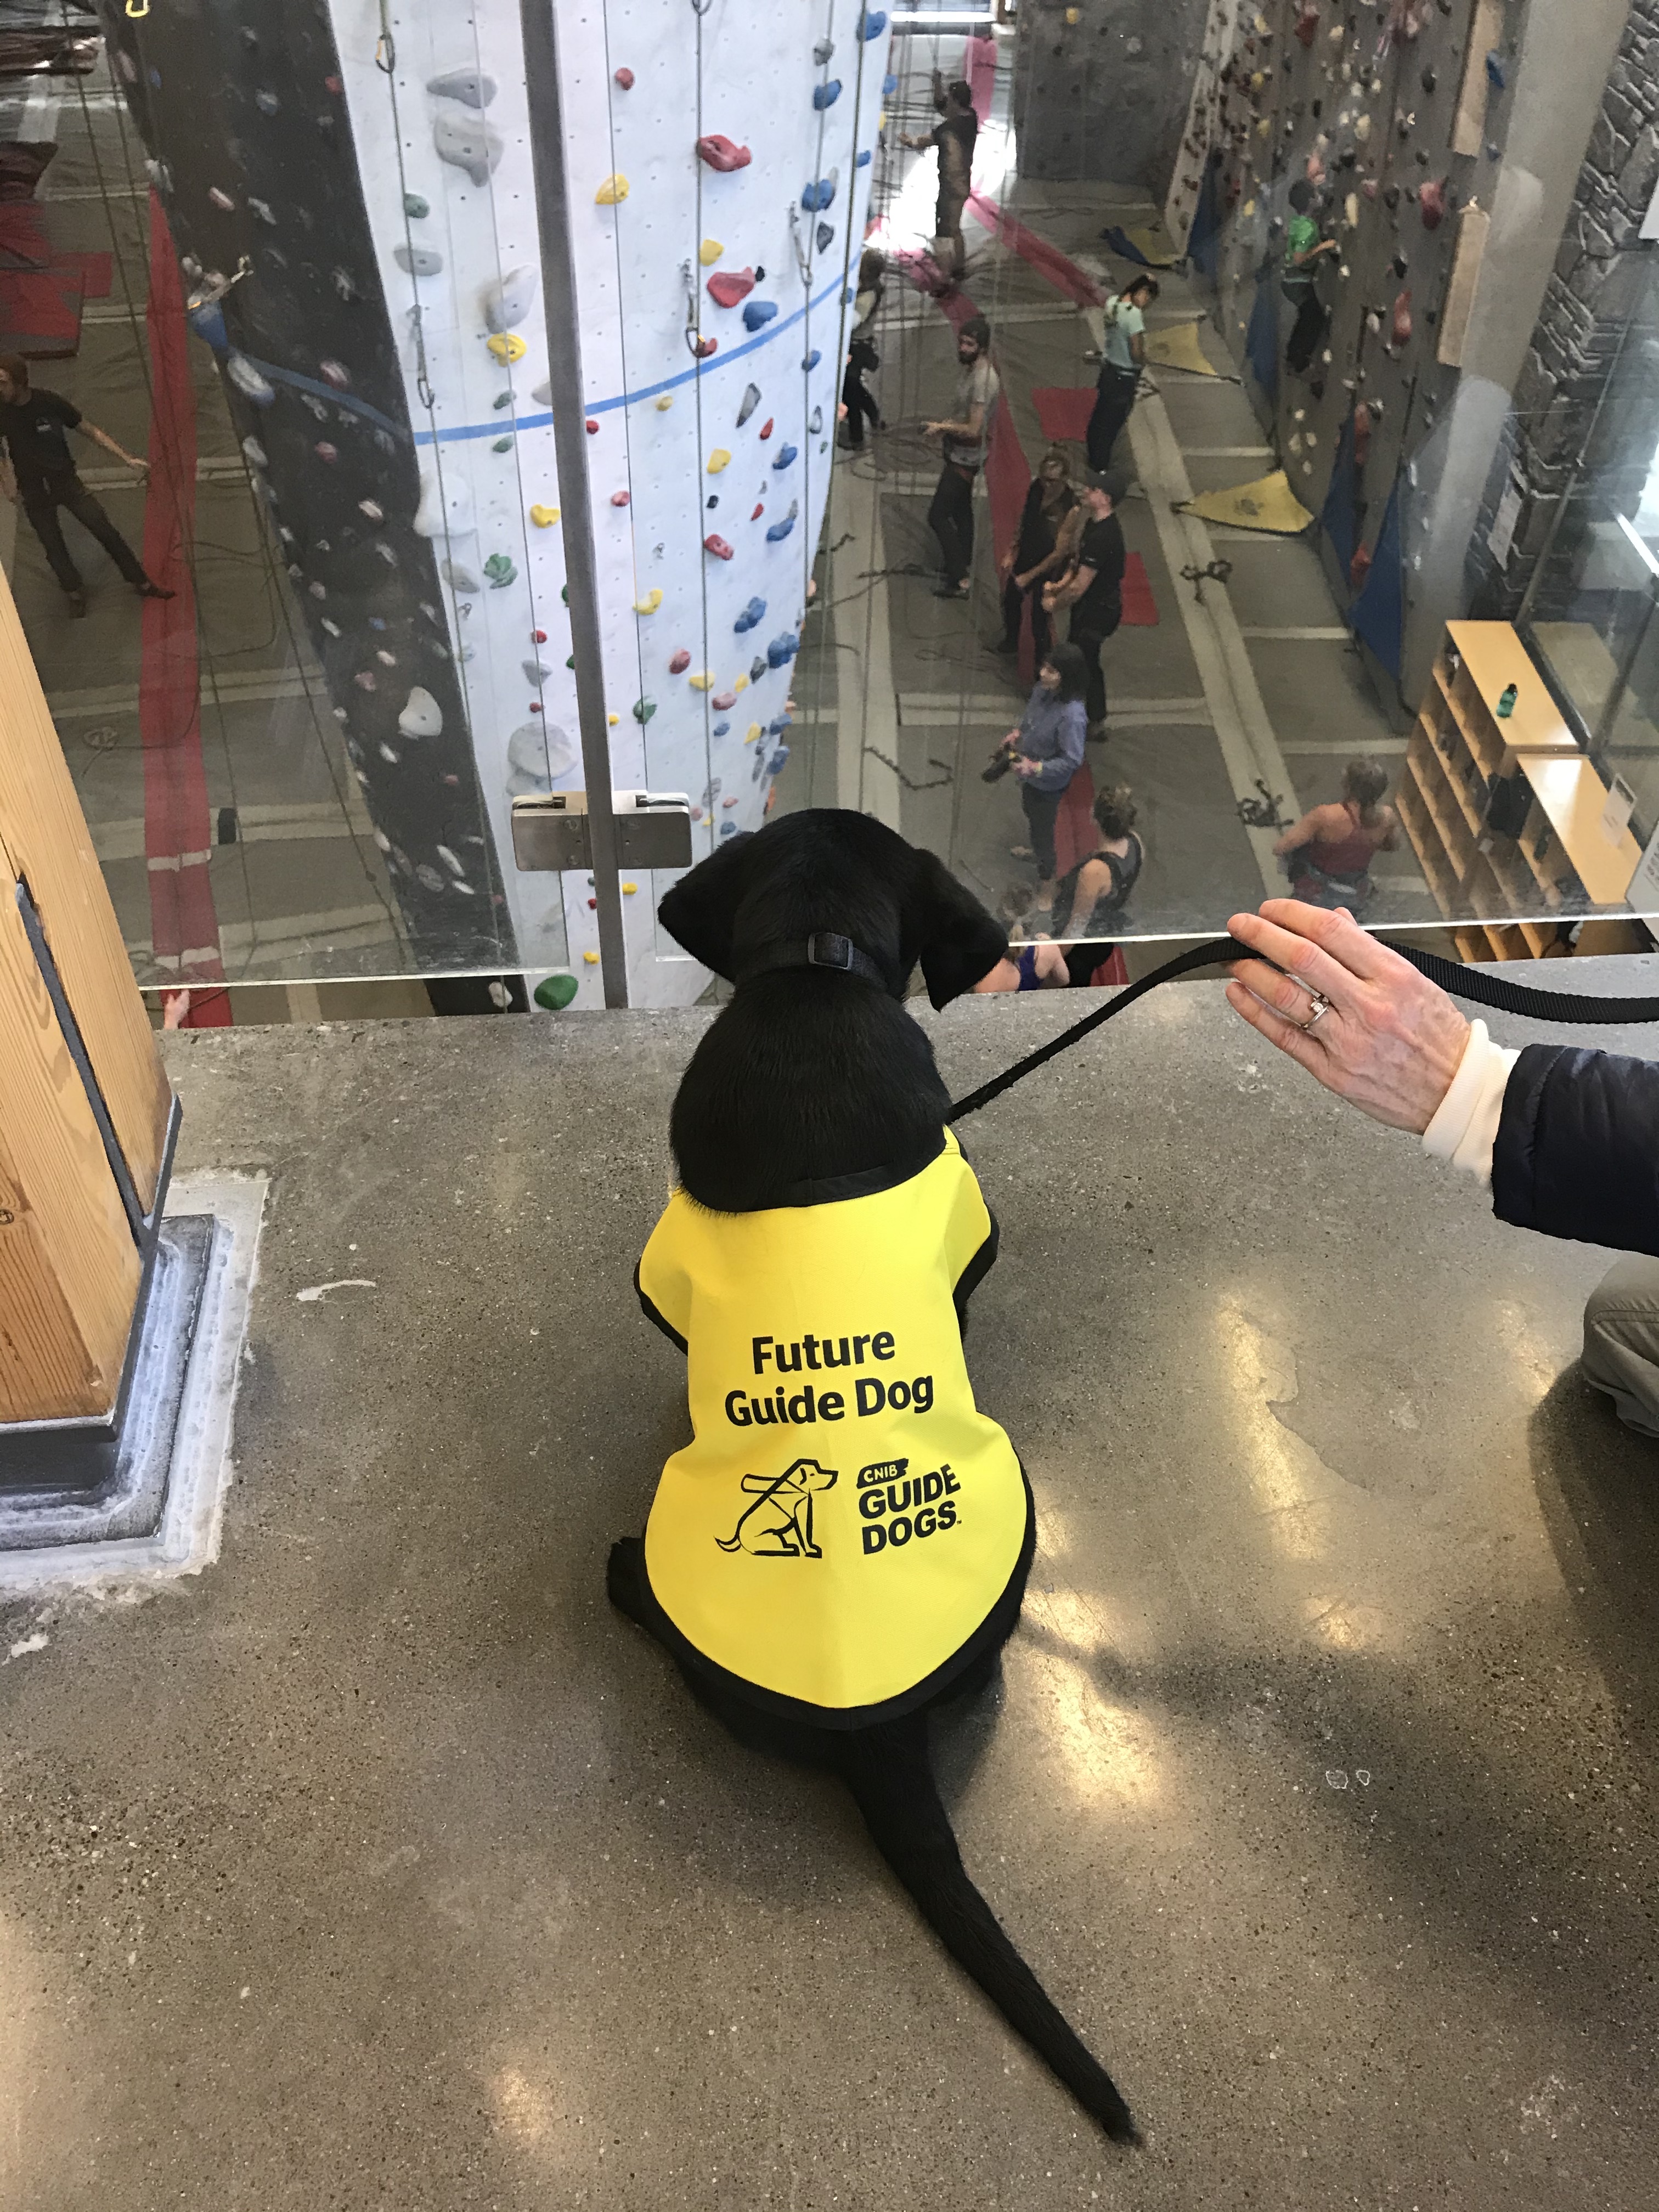 A black Labrador retriever puppy wearing a bright yellow Future Guide Dog vest sitting in front of a glass railing overlooking a rock-climbing facility